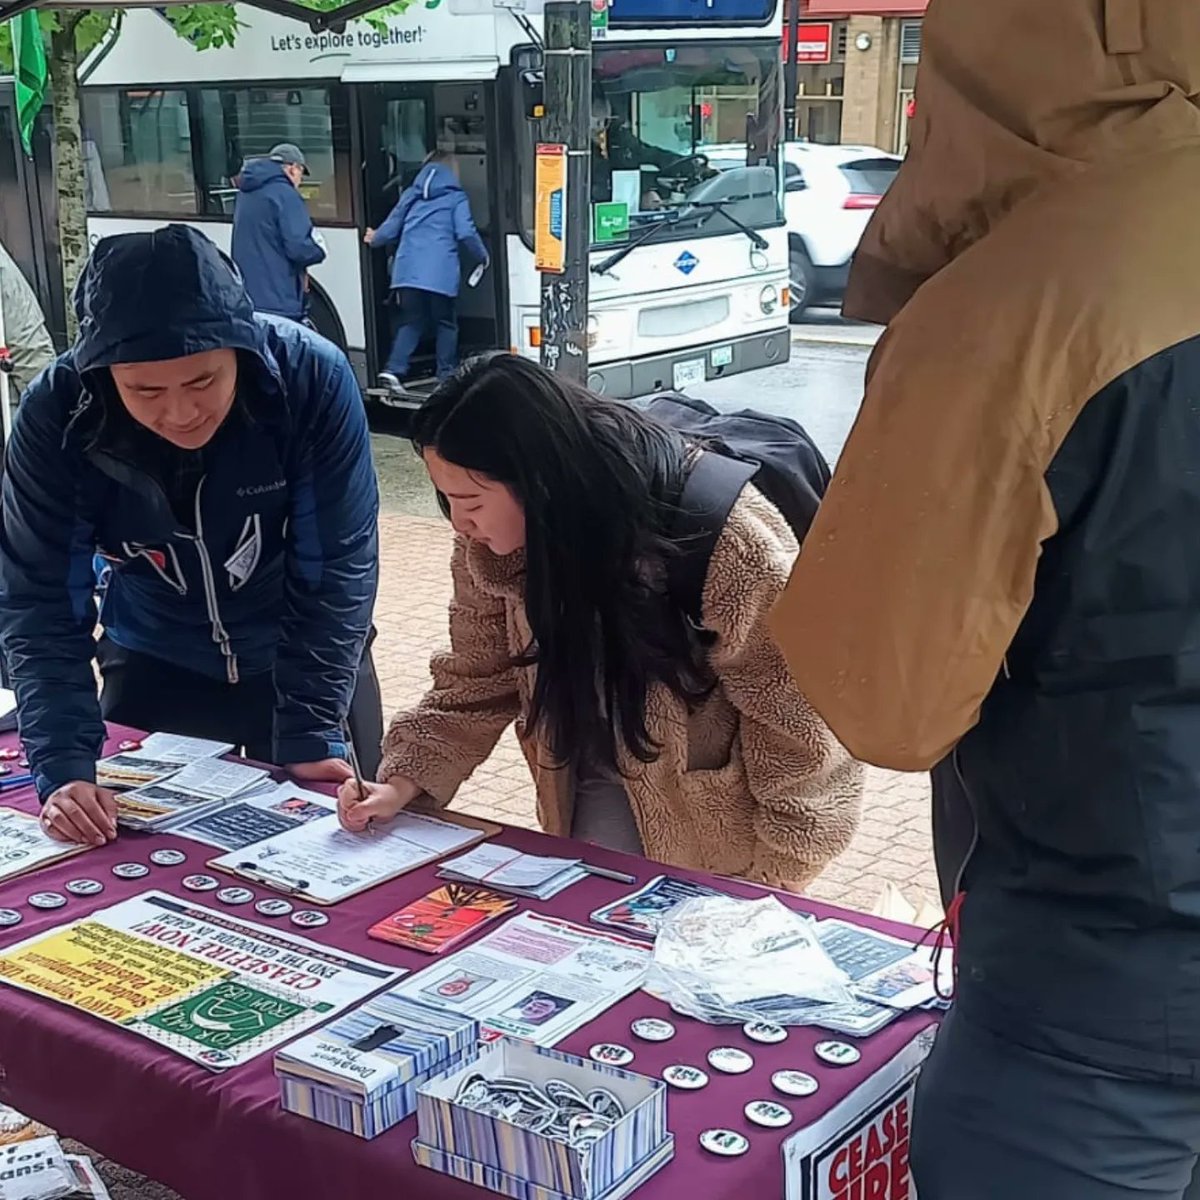 Sunday May 12 & every Sunday! Info Booth for Palestine in #Vancouver Marking Mothers Day & honouring Palestinian mothers. Come pickup literature & buttons & sign postcards to Biden for #CeasefireNOW #EndtheGenocideNOW Send a message or call for location✊🇵🇸 #vanpoli #cdnpoli